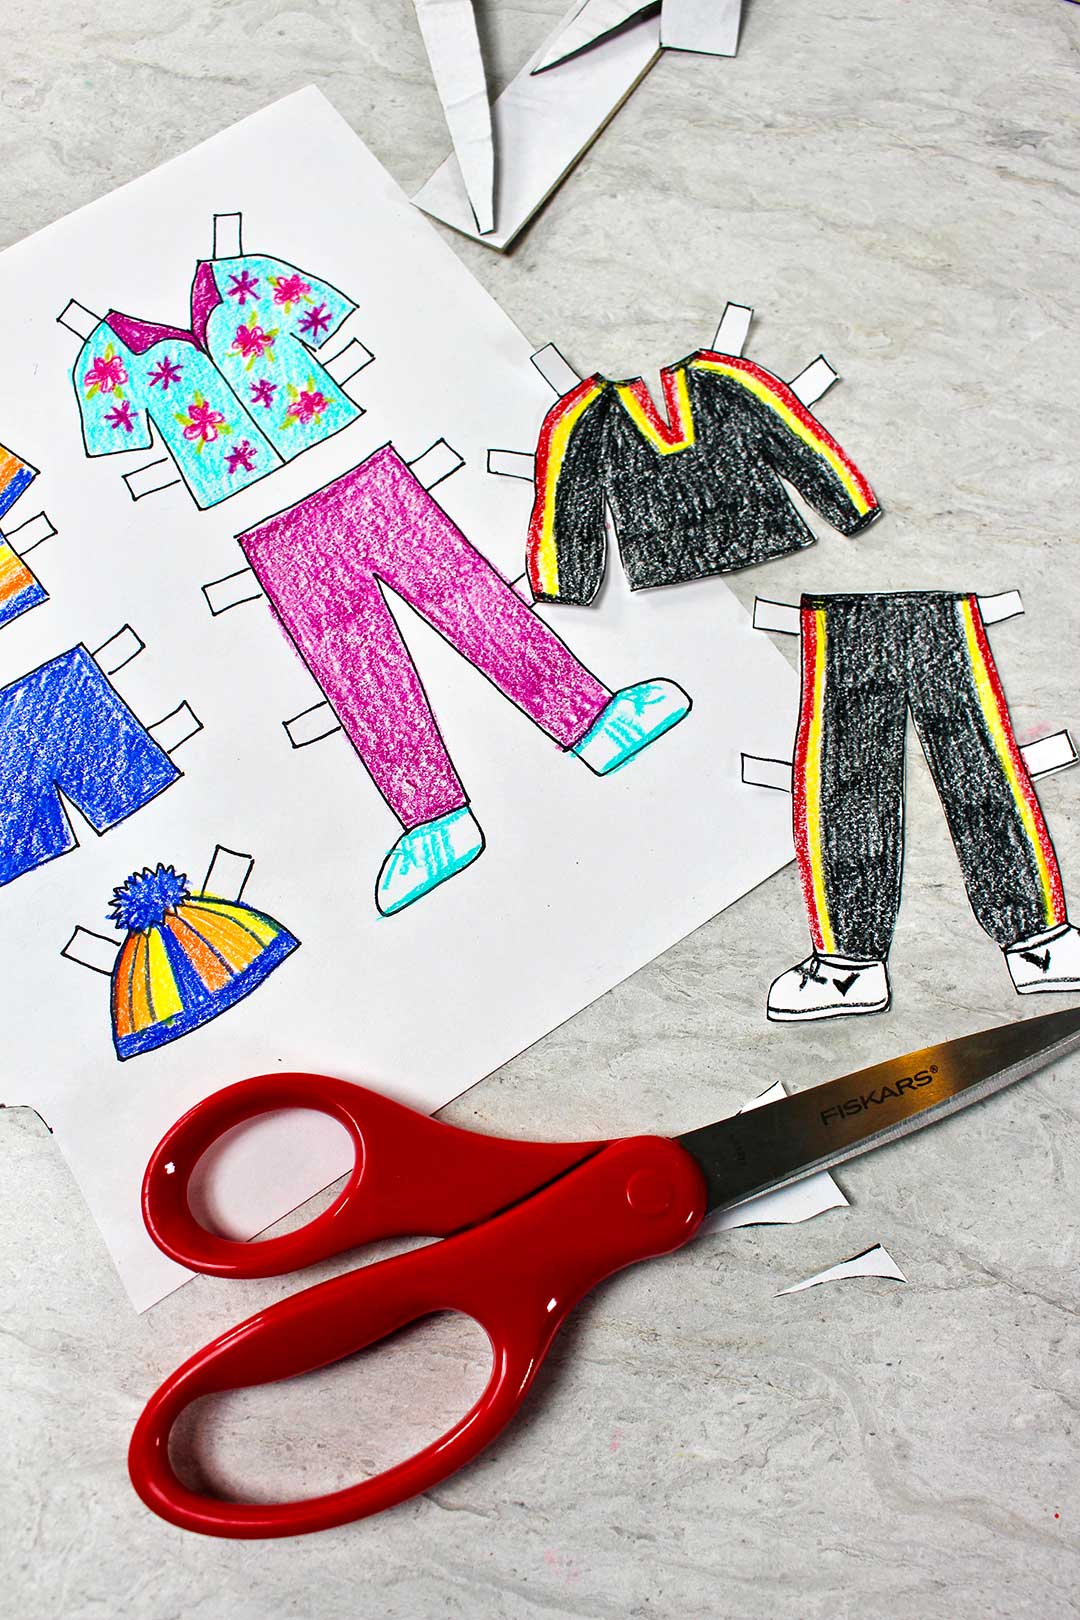 Different colored outfits for paper dolls, some cut out and some on sheet. Red scissors nearby.